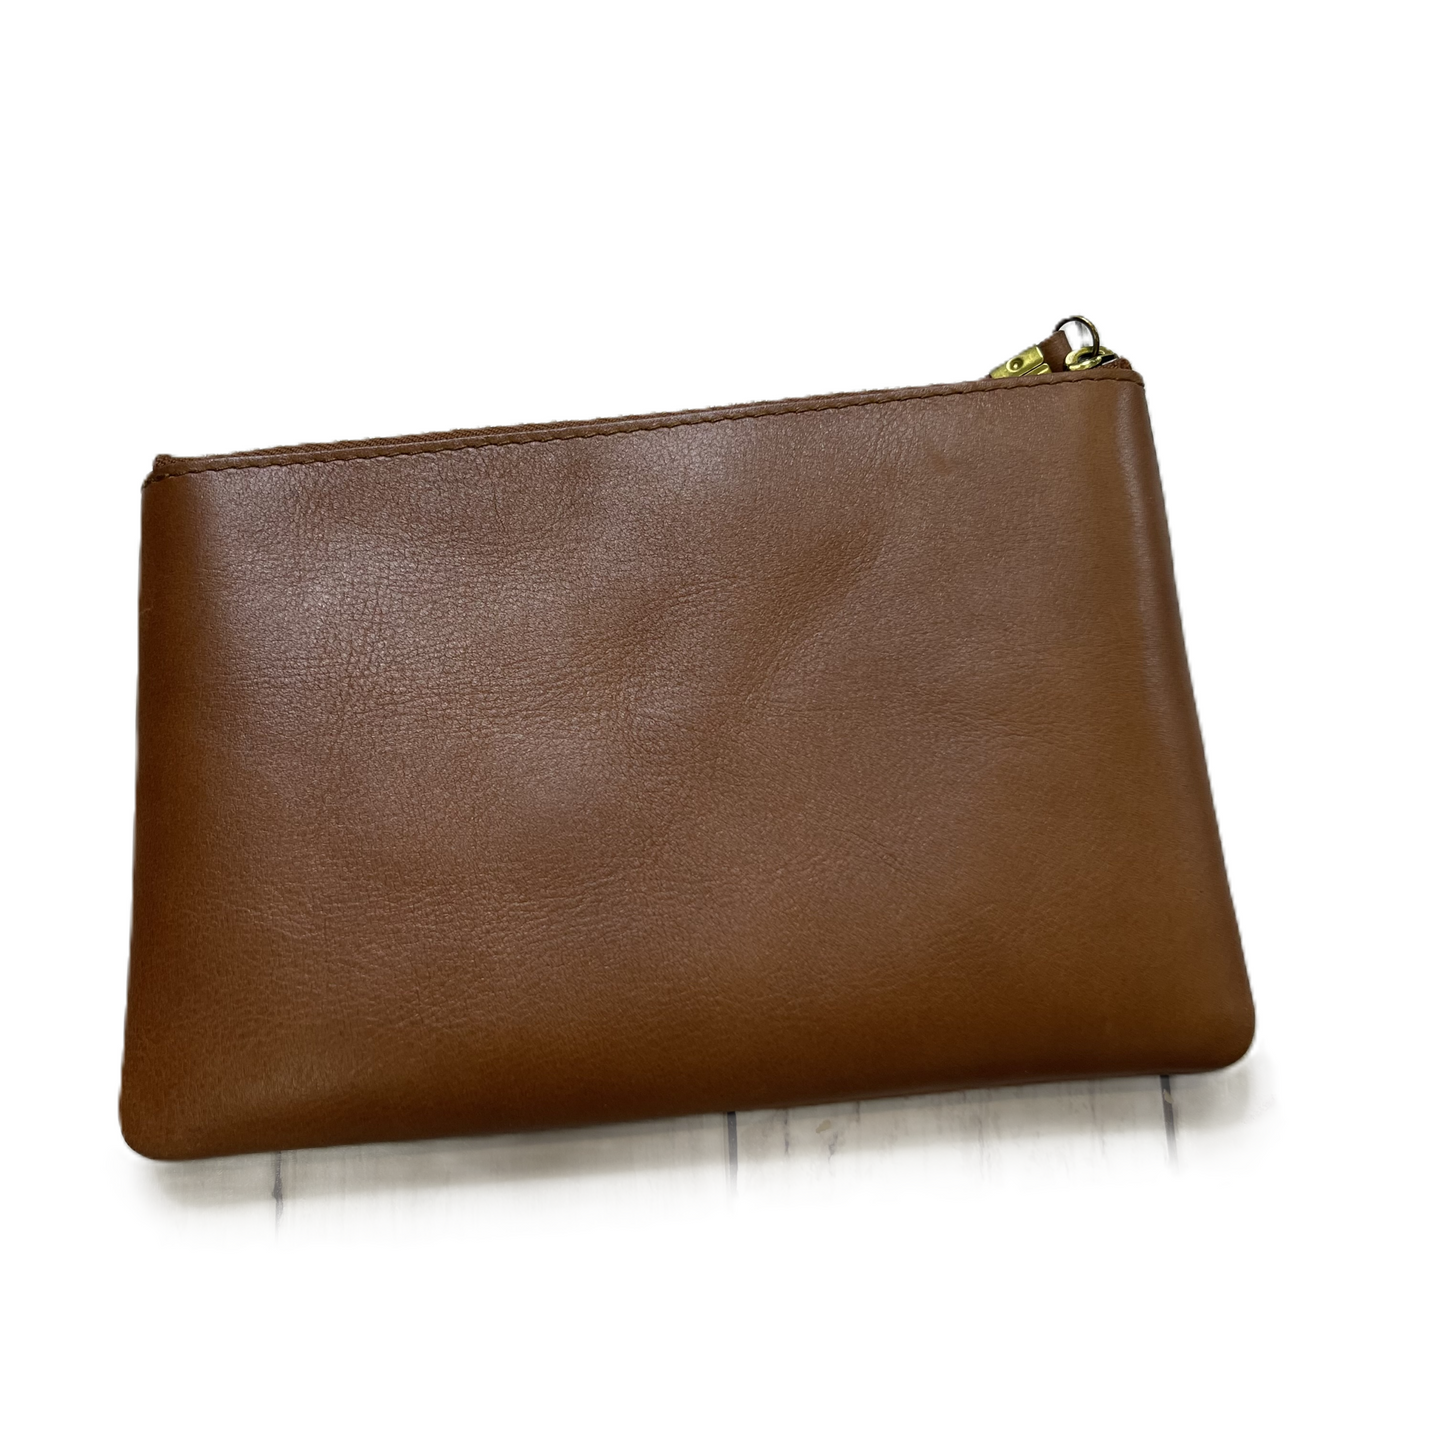 Clutch Leather By Madewell, Size: Medium